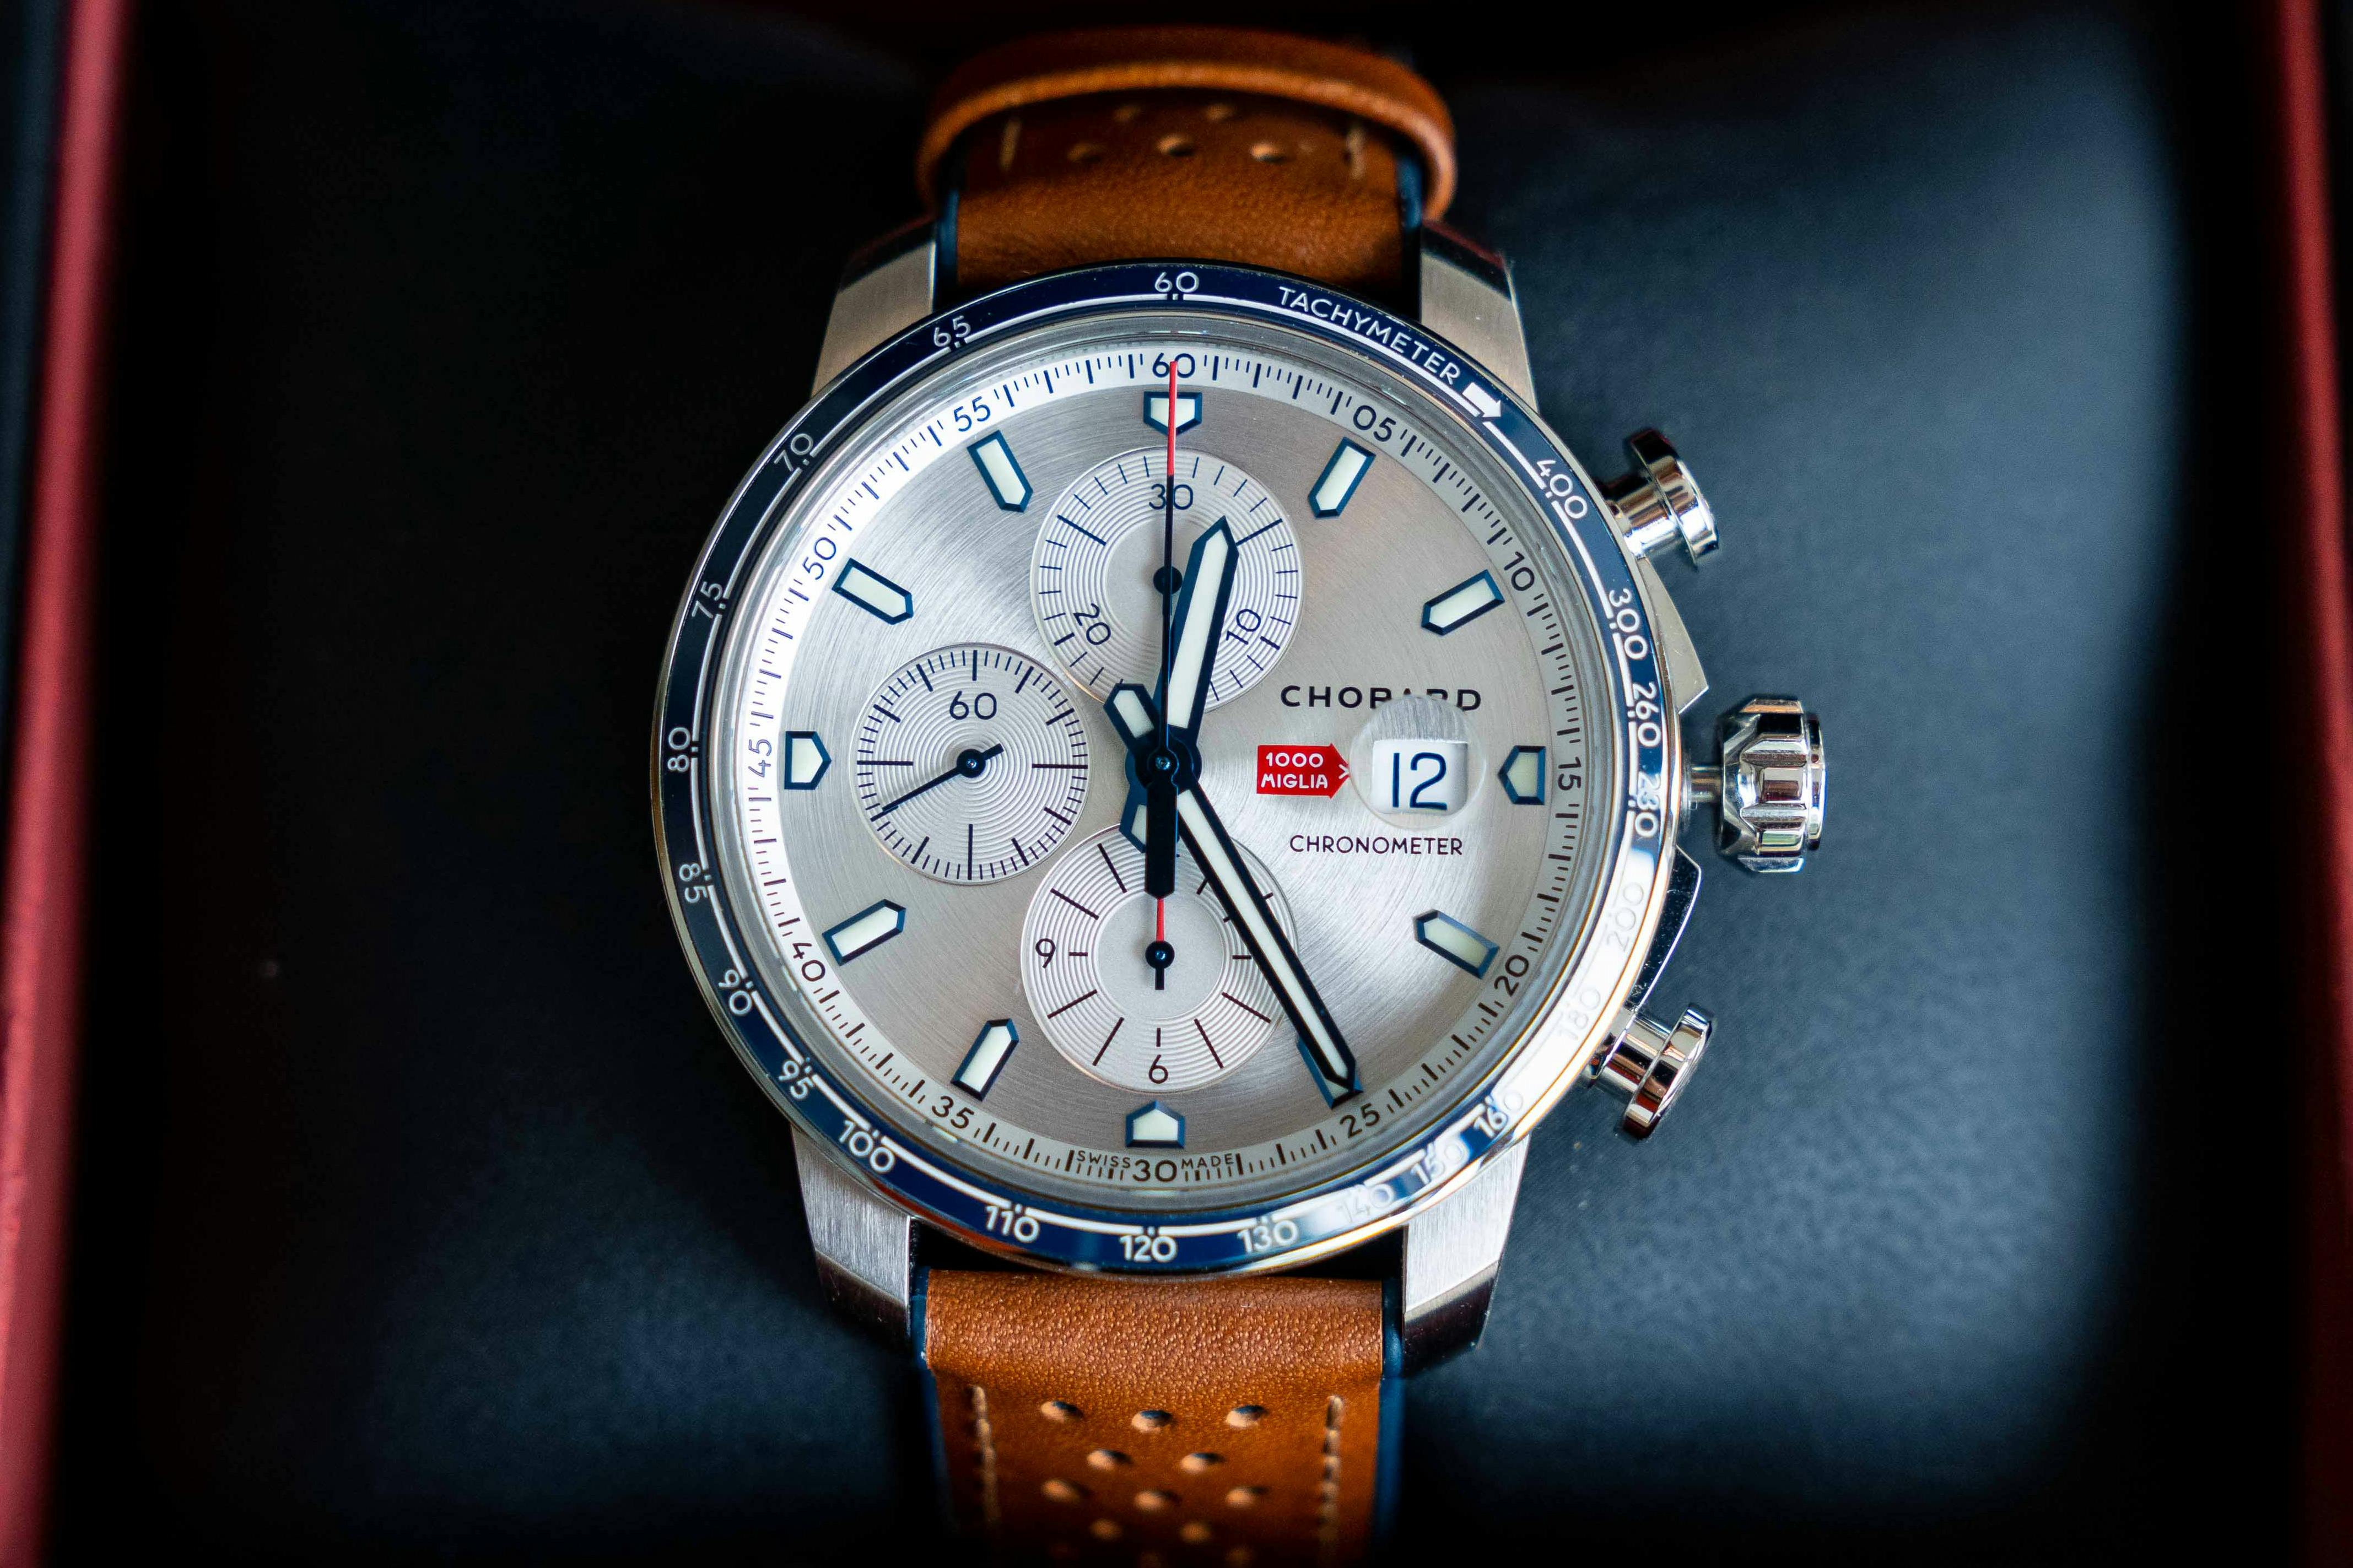 Mille Miglia GTS Limited Edition Automatic Chronograph 44mm Stainless Steel  and Leather Watch, Ref. No. 168571-3010